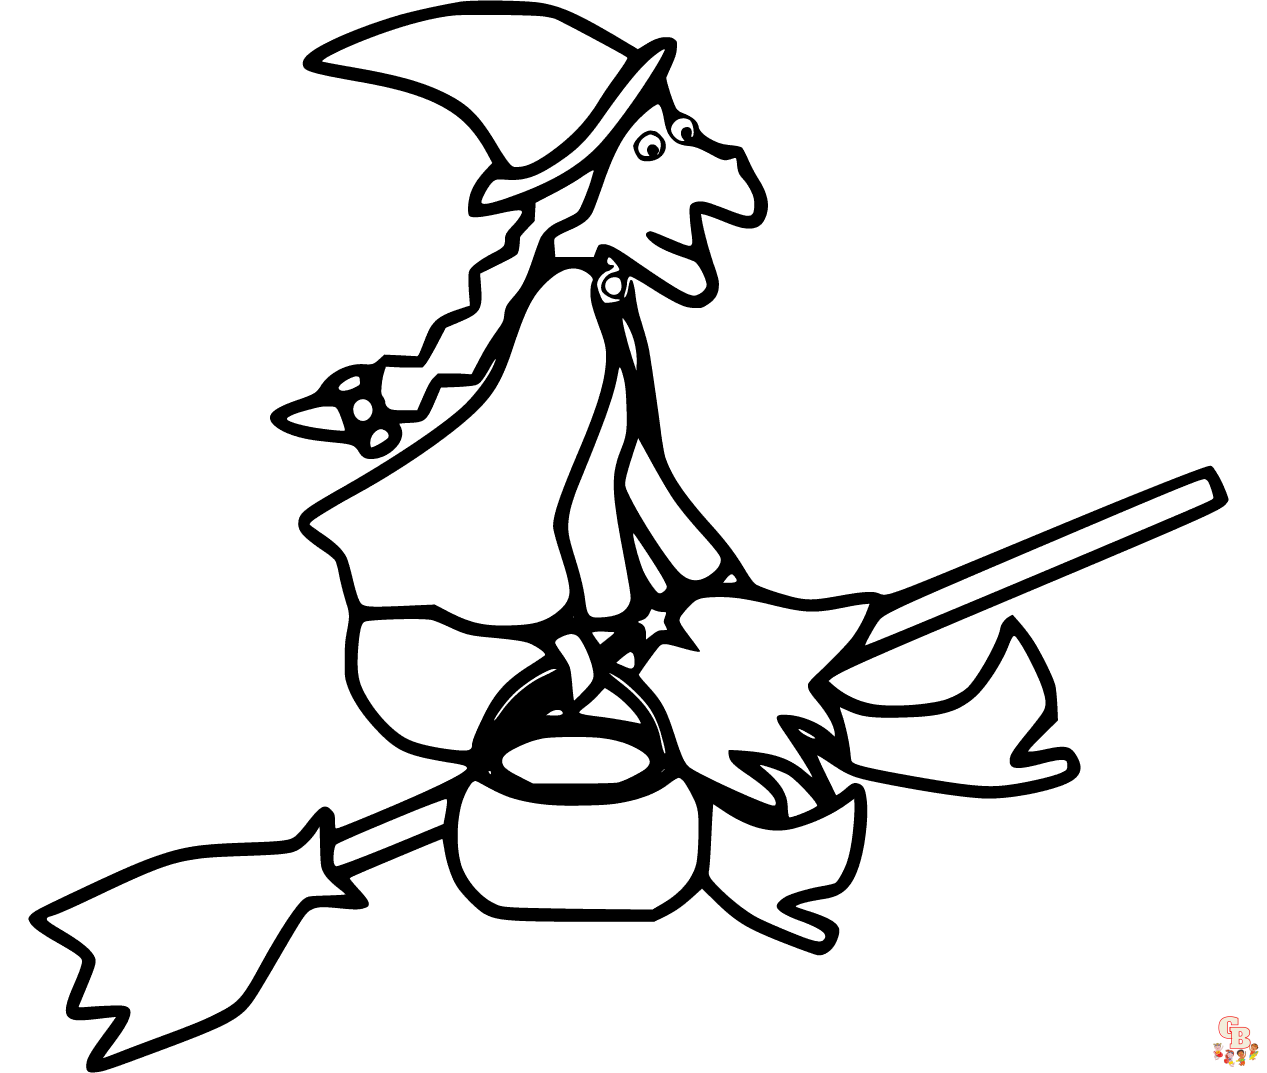 Printable Room on the Broom coloring sheets